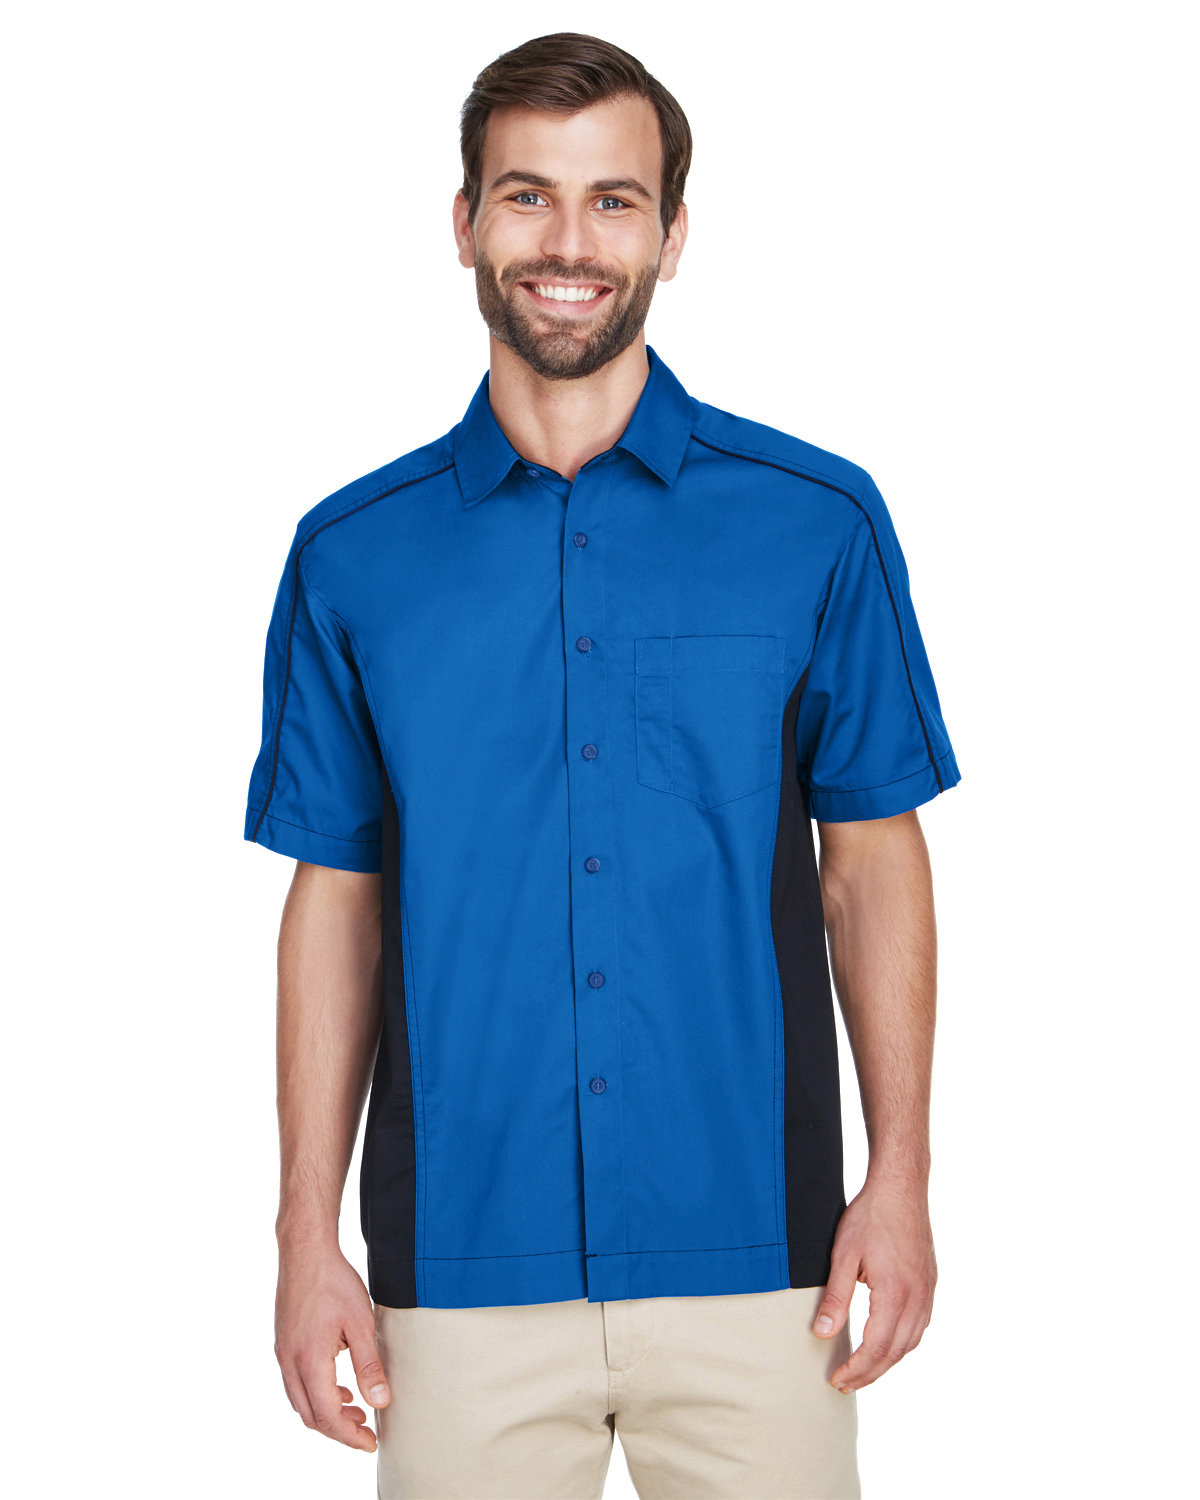 Buy Mens Fuse Colorblock Twill Shirt - North End Online at Best price - SC